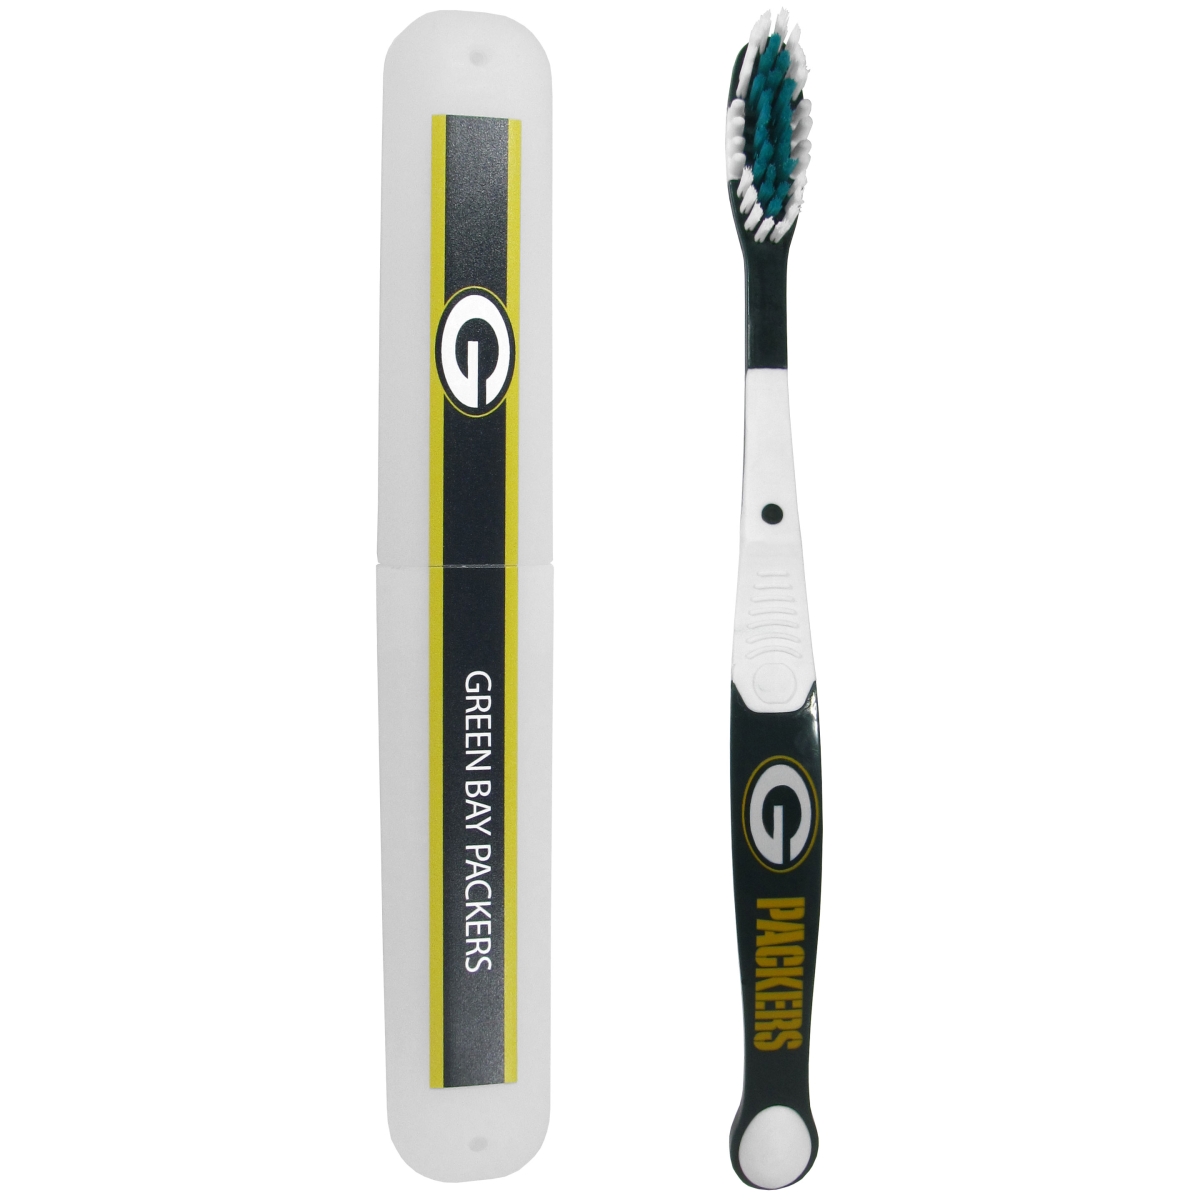 Picture of Siskiyou FTBR115TBC Unisex NFL Green Bay Packers Toothbrush & Travel Case - One Size